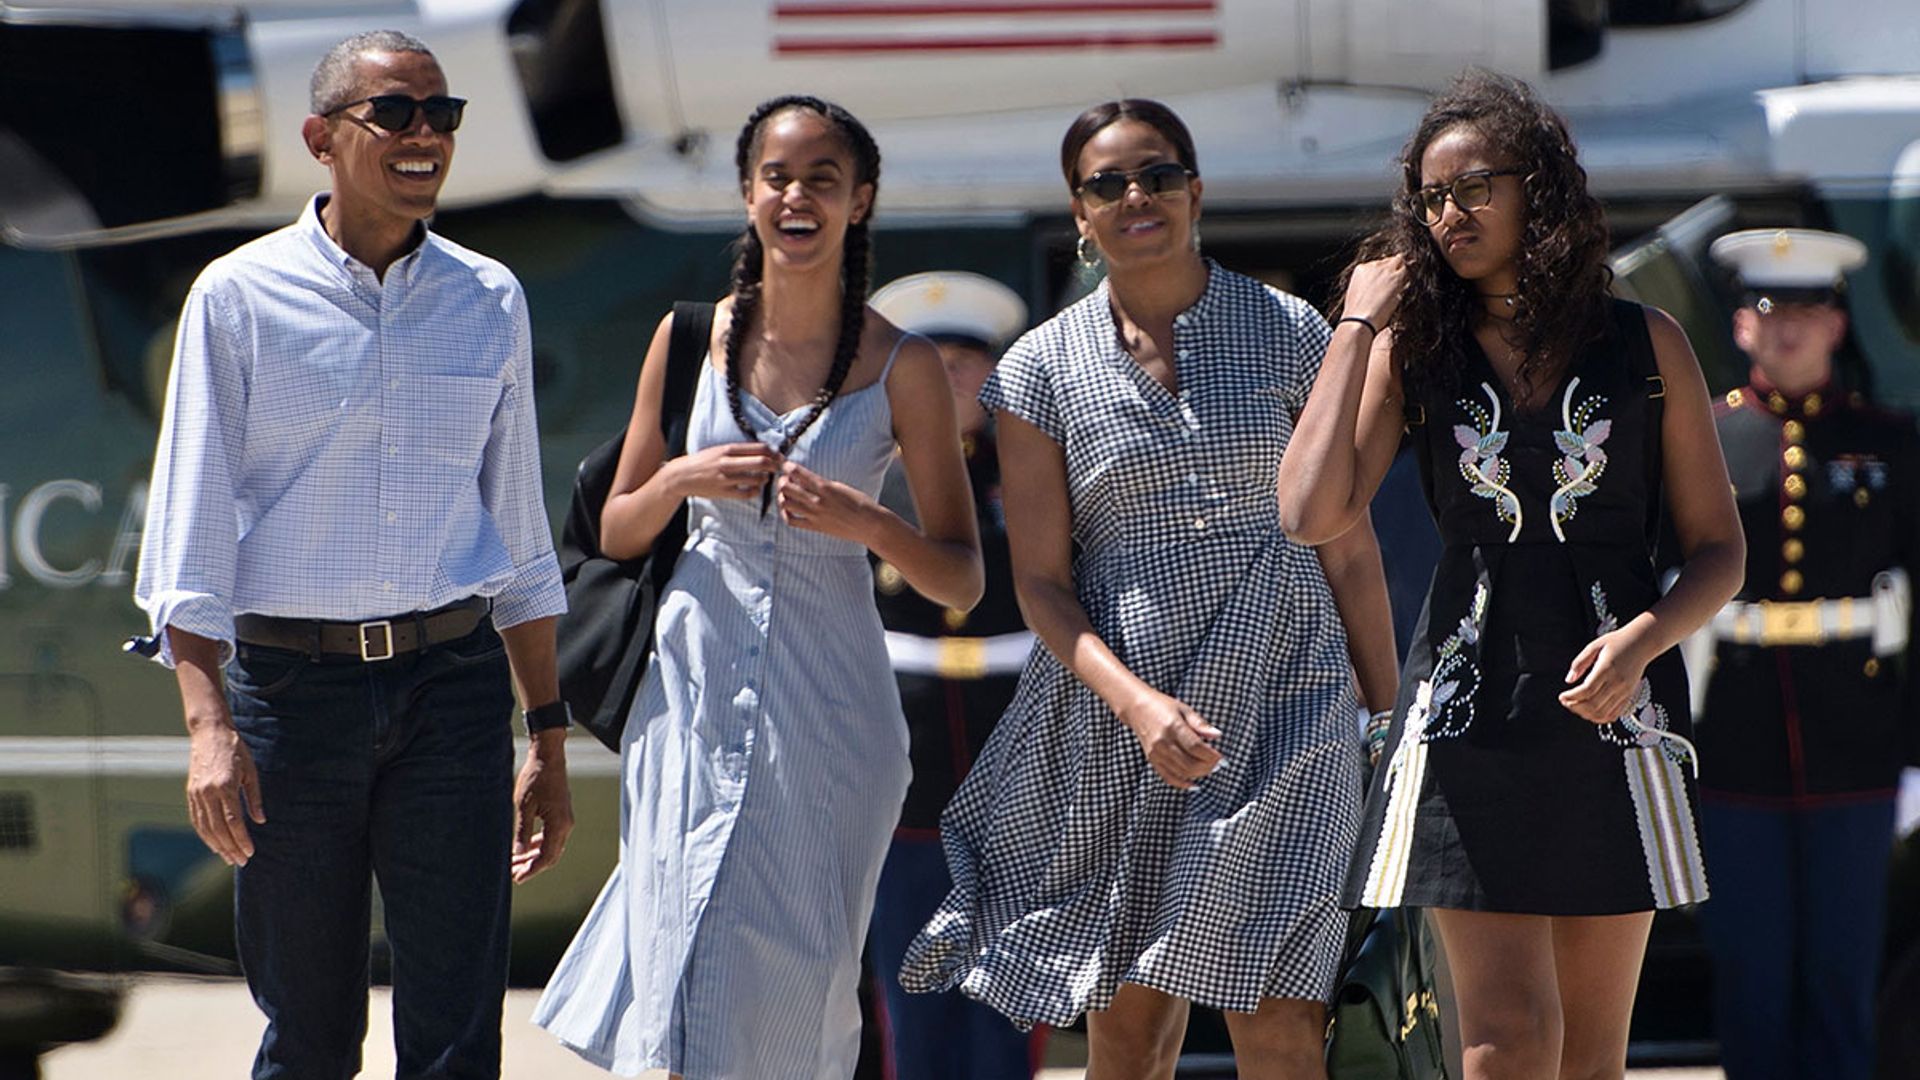 Michelle Obama's daughters steal the spotlight in candid family photo